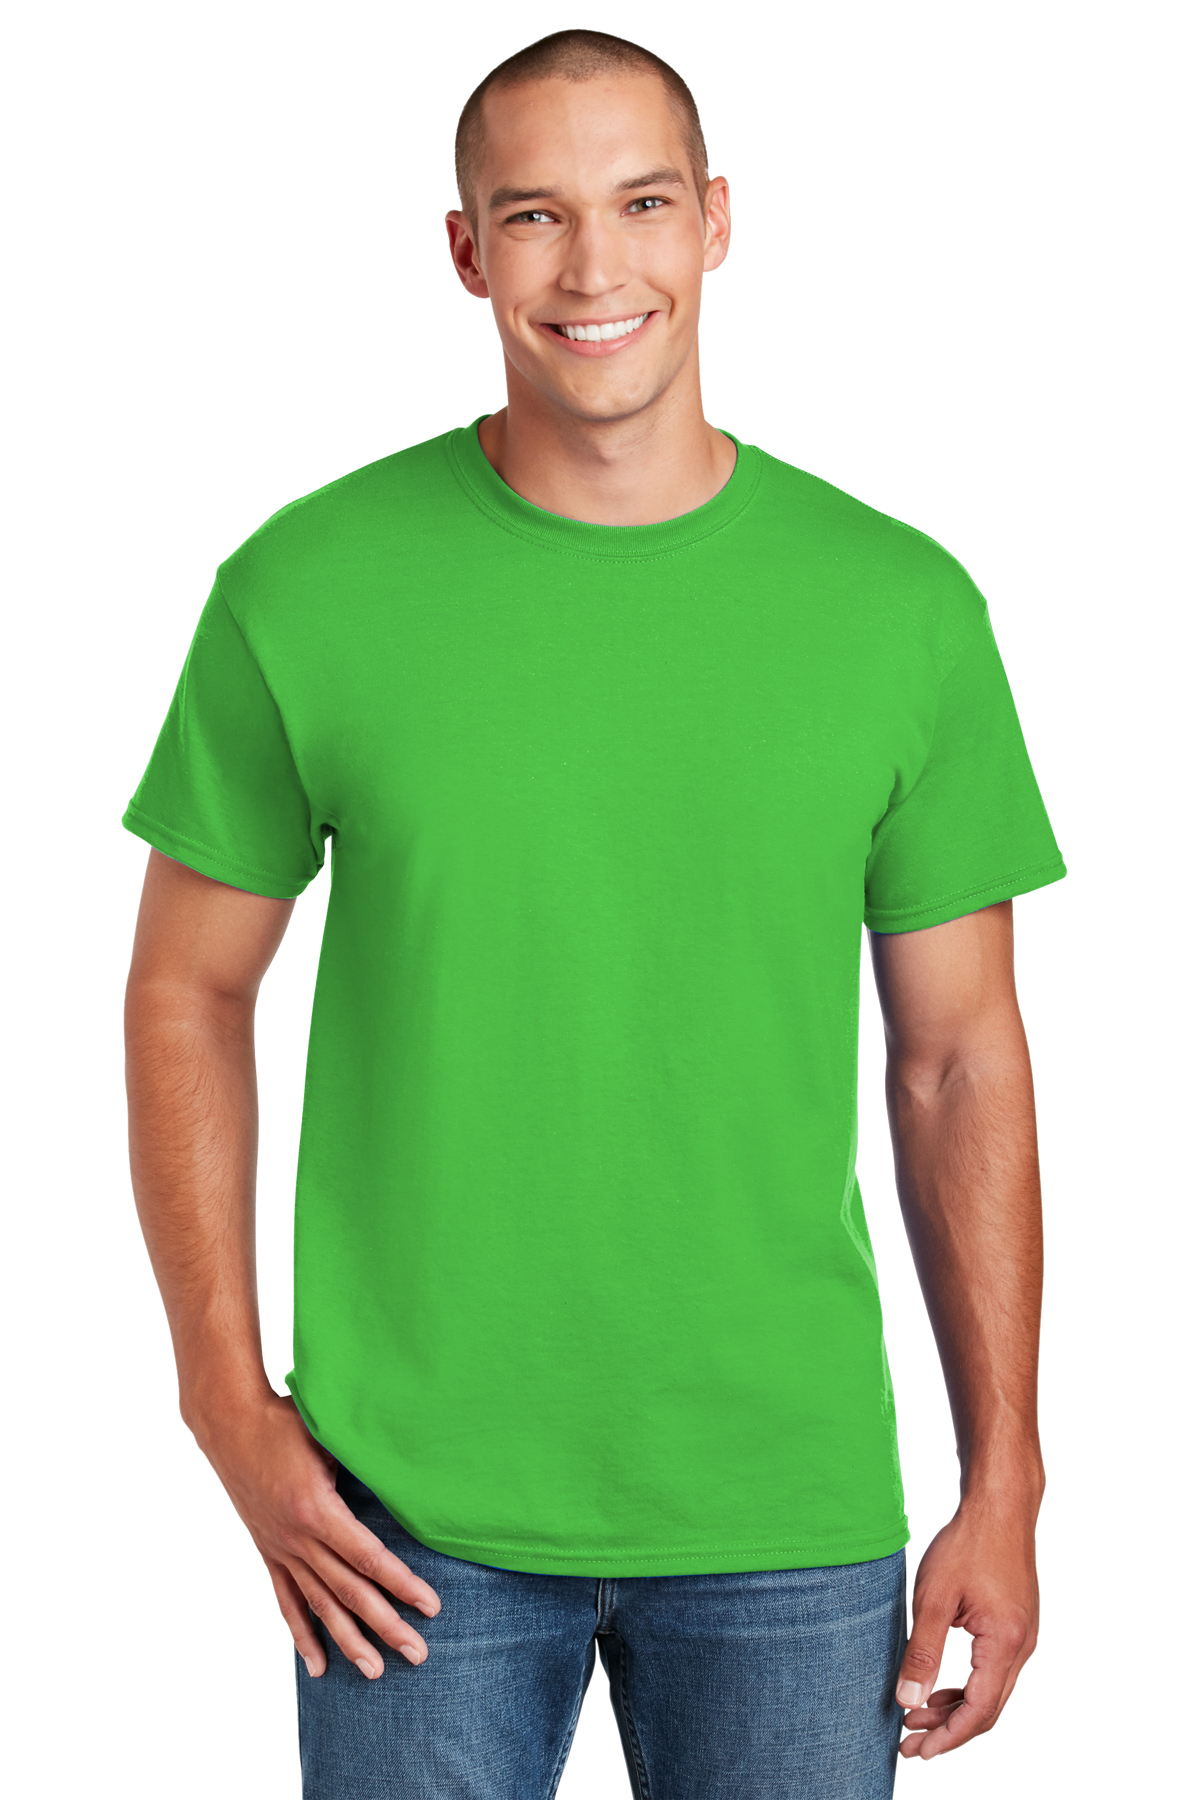 T-Shirts, Custom Imprinted With Your Logo!